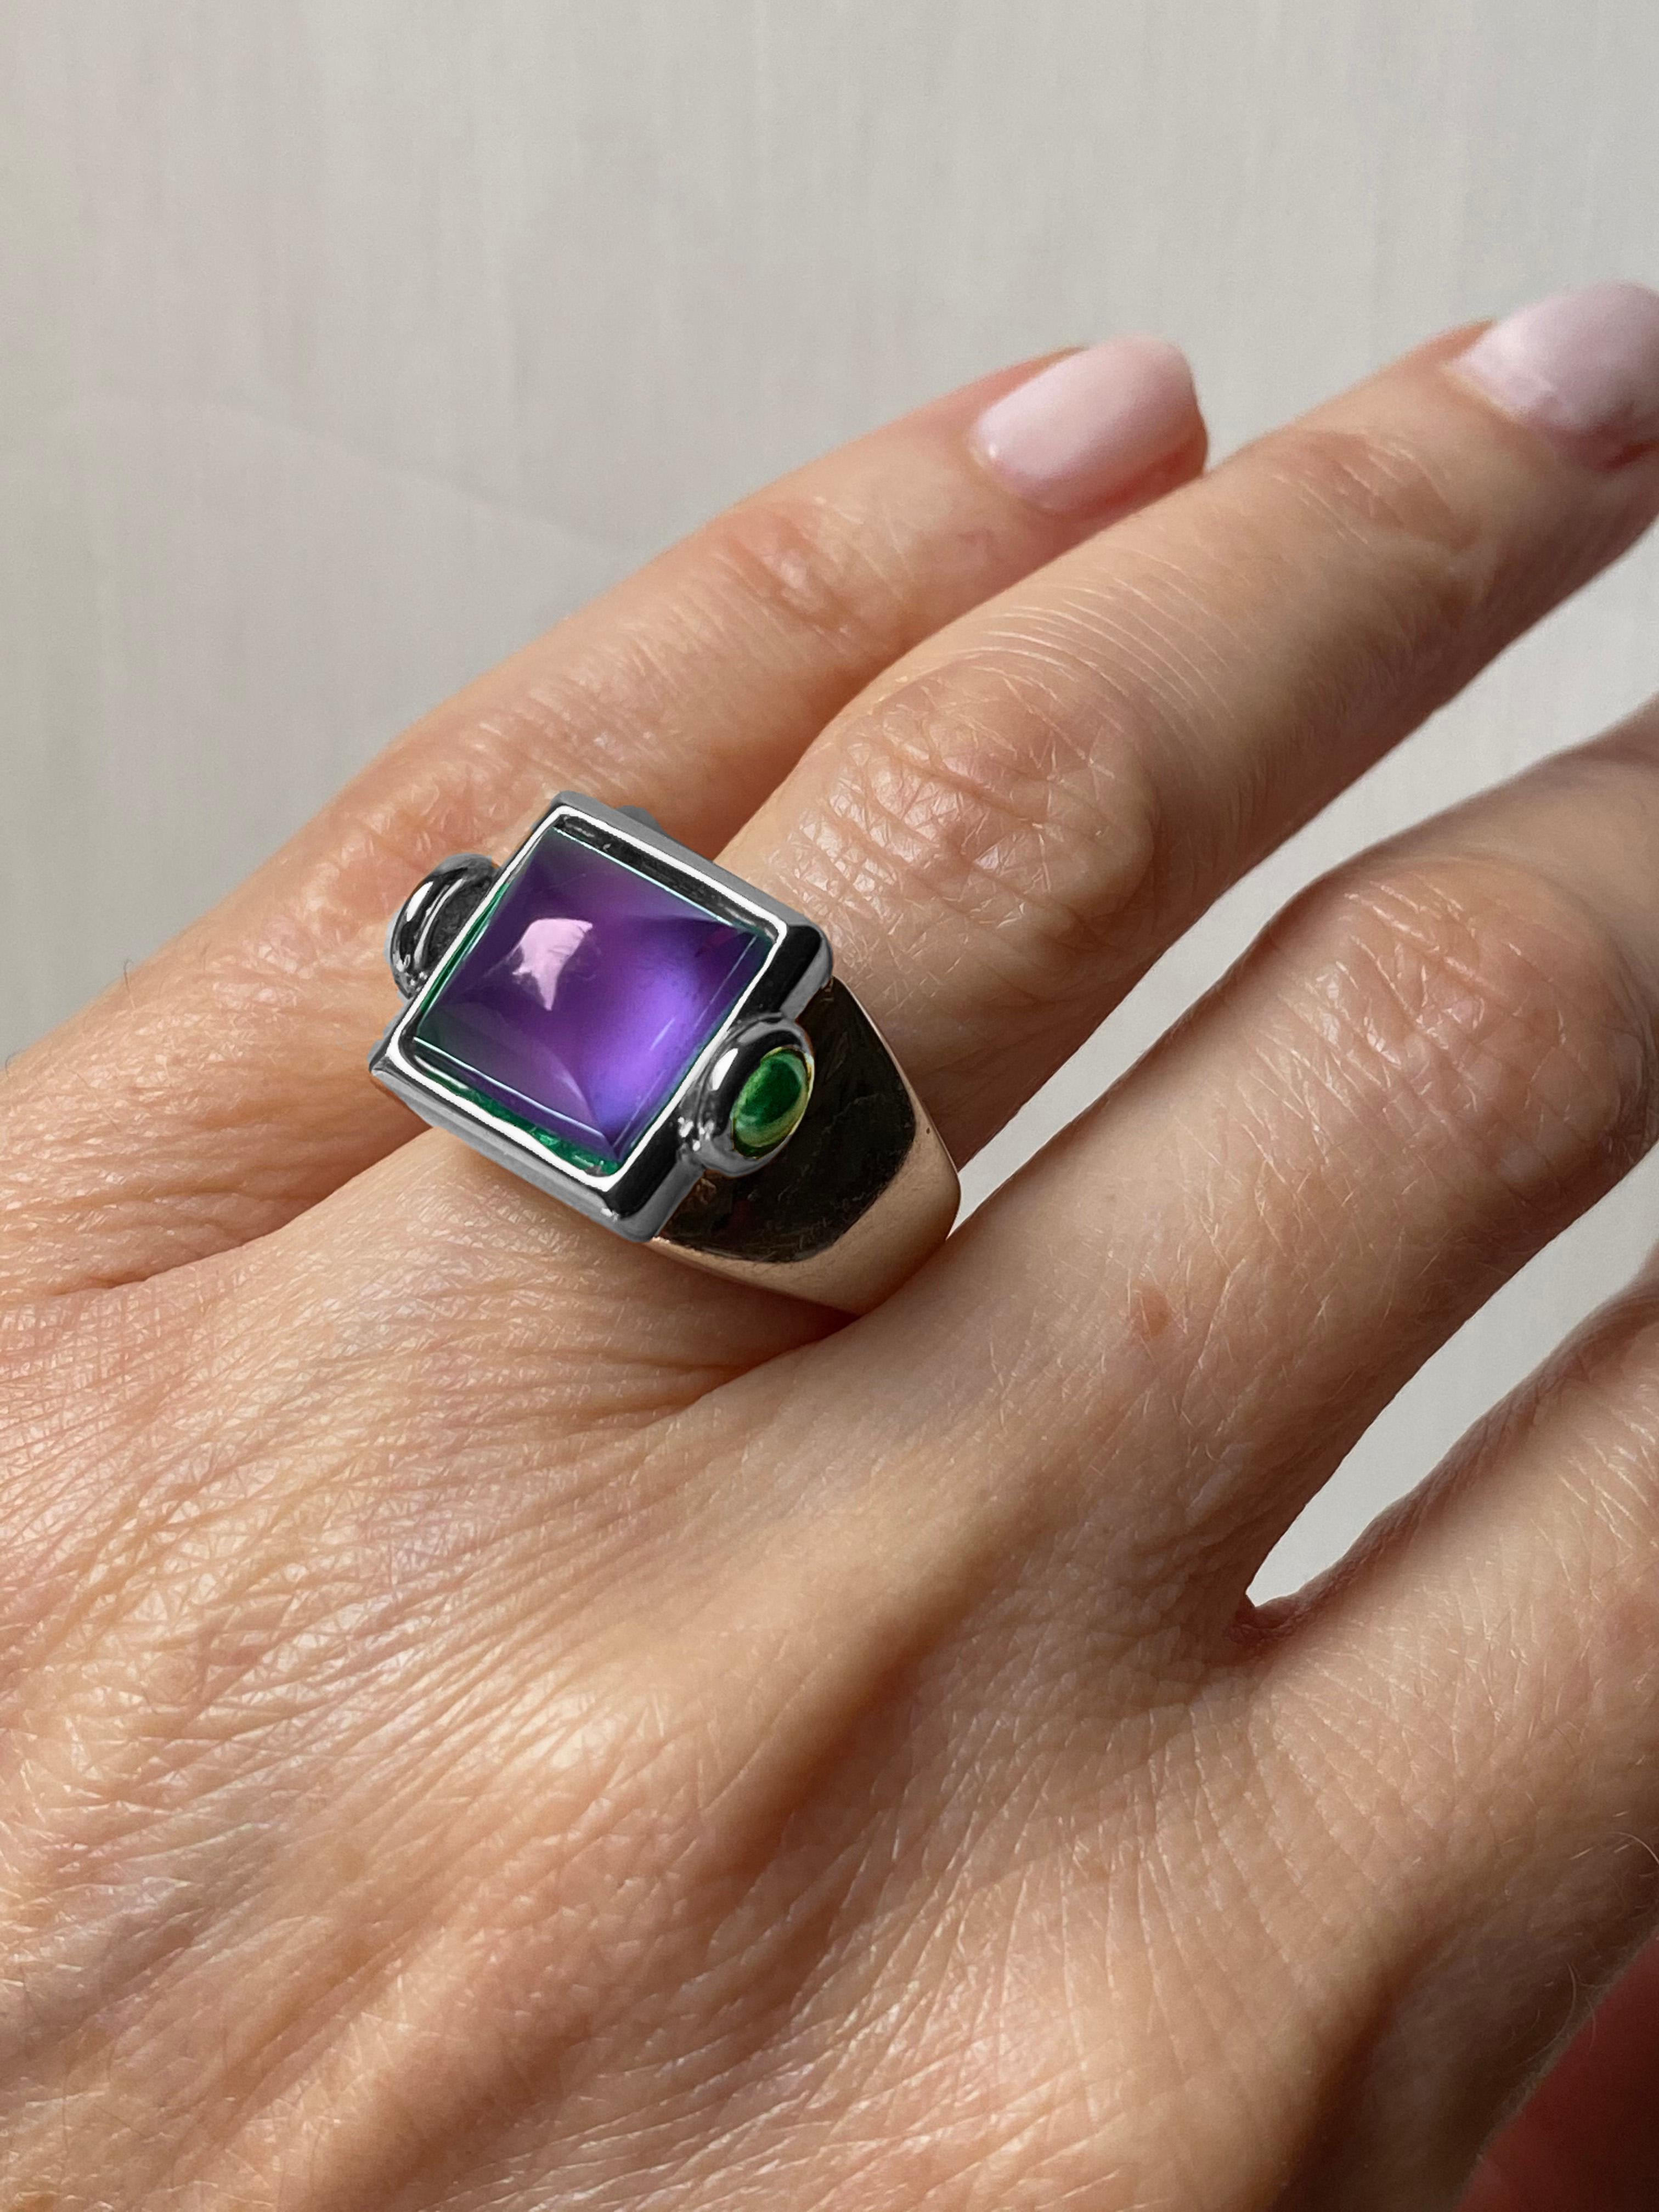 Rossella Ugolini's Castle of Italy design collection, meticulously handcrafted in Platinum featuring a striking Sugarloaf Cabochon Amethyst accented by two cabochon Green Emeralds . This exceptional Platinum craftsmanship, originating from Italy,